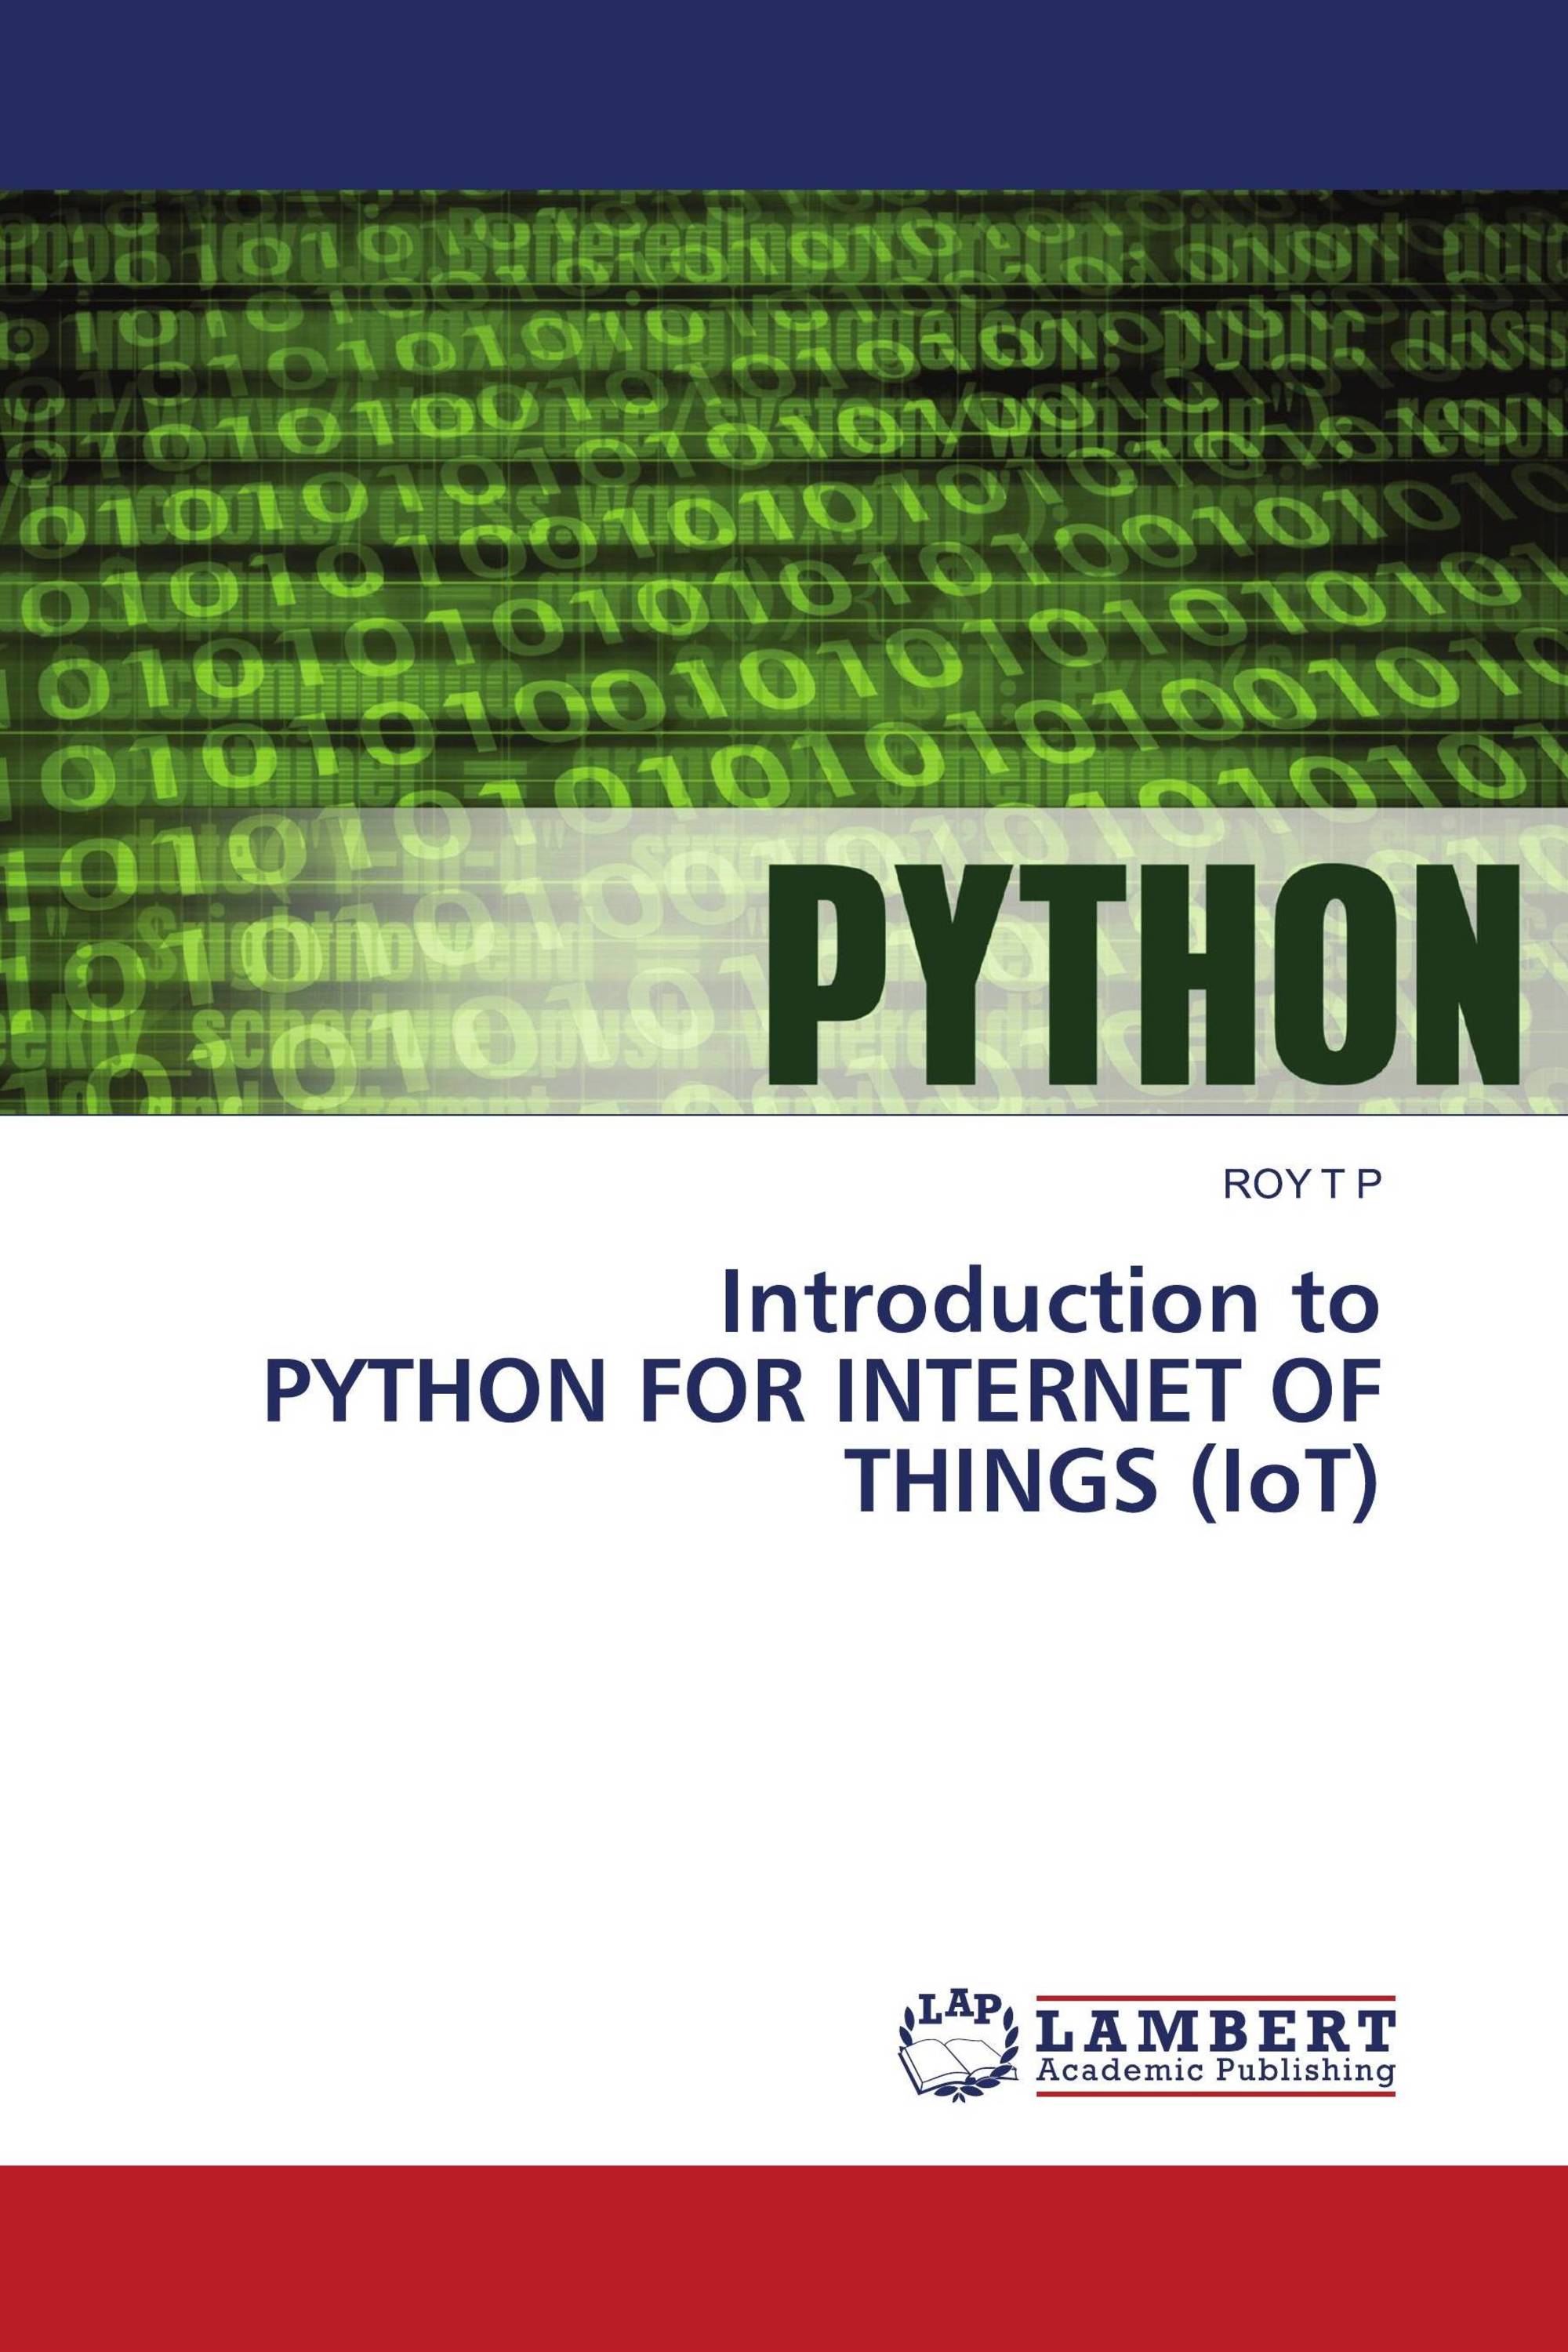 Introduction to PYTHON FOR INTERNET OF THINGS (IoT)